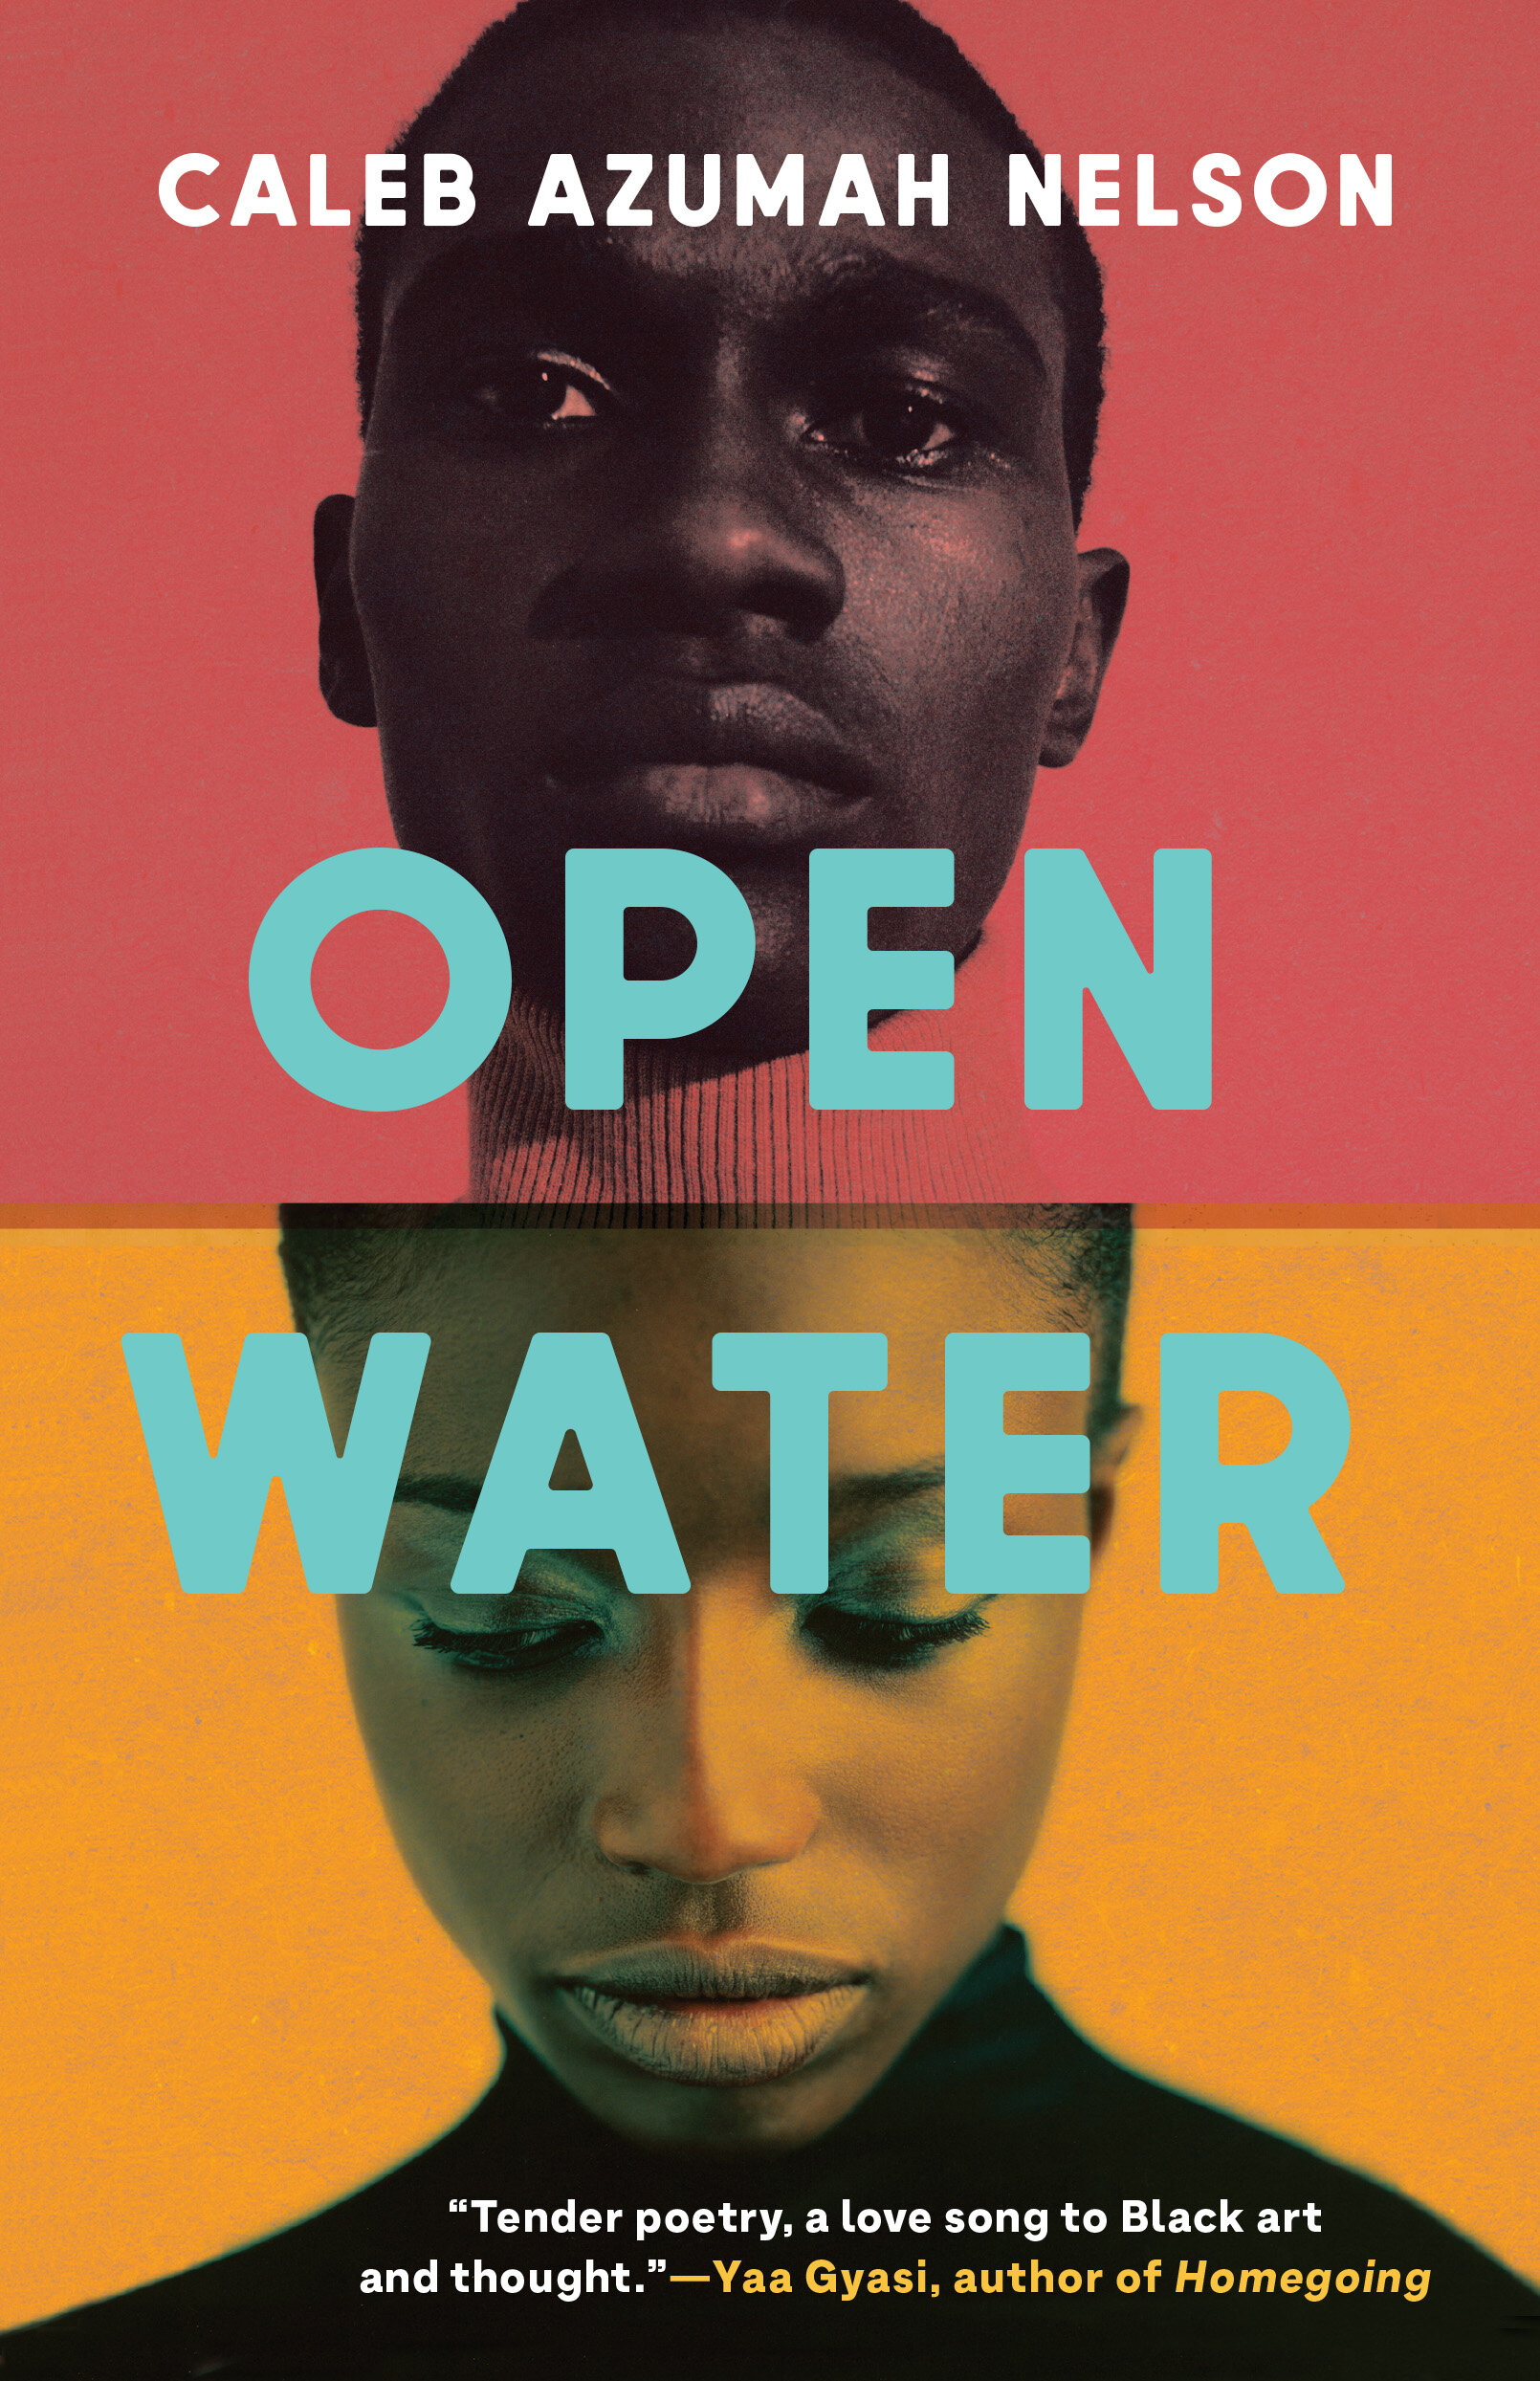 A Deep Dive Into Caleb Azumah Nelson's “open Water”